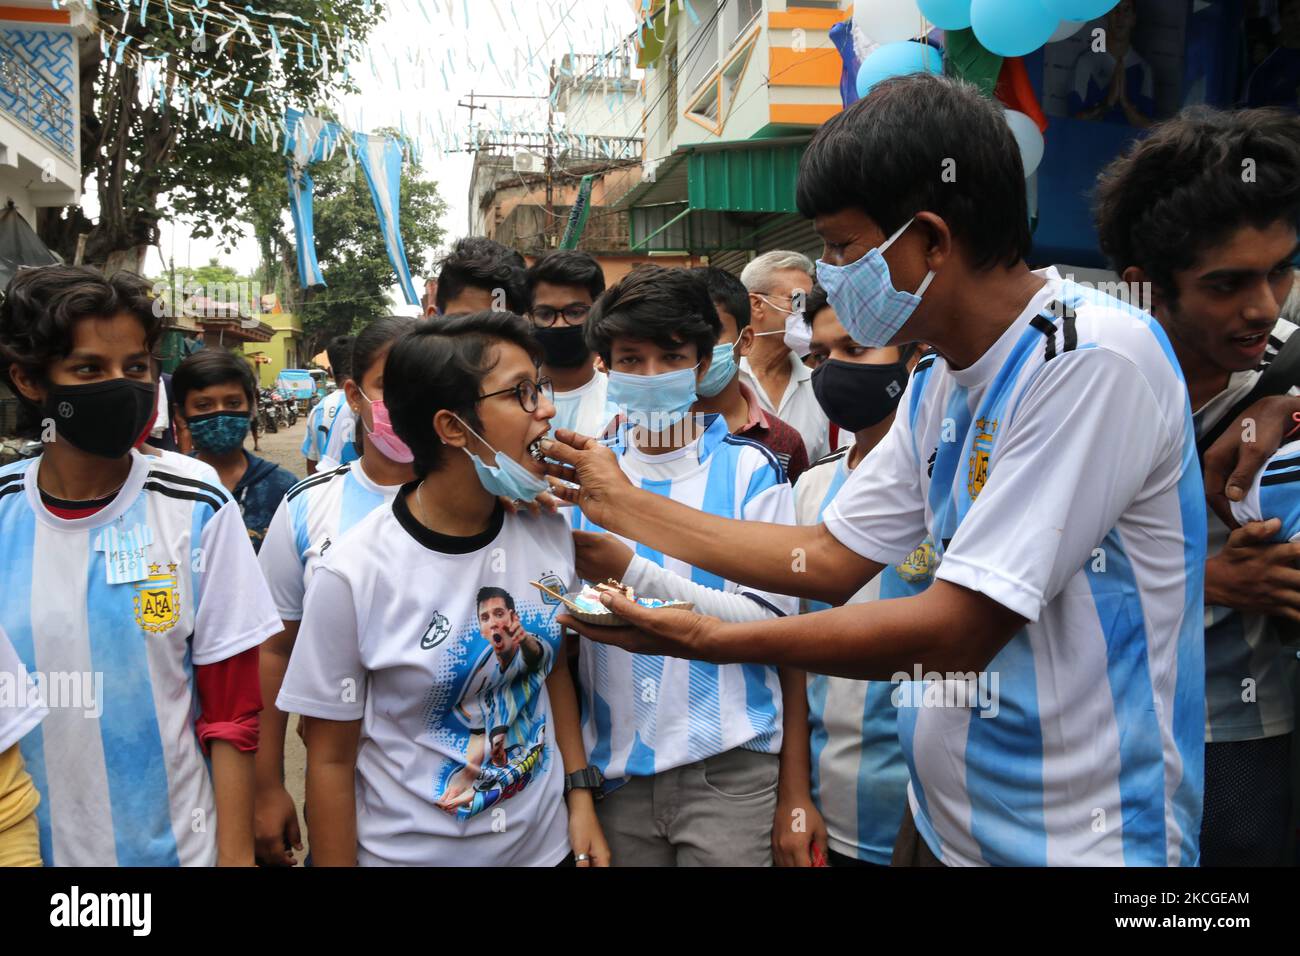 Shib Shankar Patra ( R ), football fan of Argentina team, with Argentina fans Club members during 34th birthday celebration of the world famous professional footballer Lionel Messi at North 24 Pargana Kolkata to 27 Kilometer distances north, West Bengal, India, on June 24, 2021. (Photo by Debajyoti Chakraborty/NurPhoto) Stock Photo